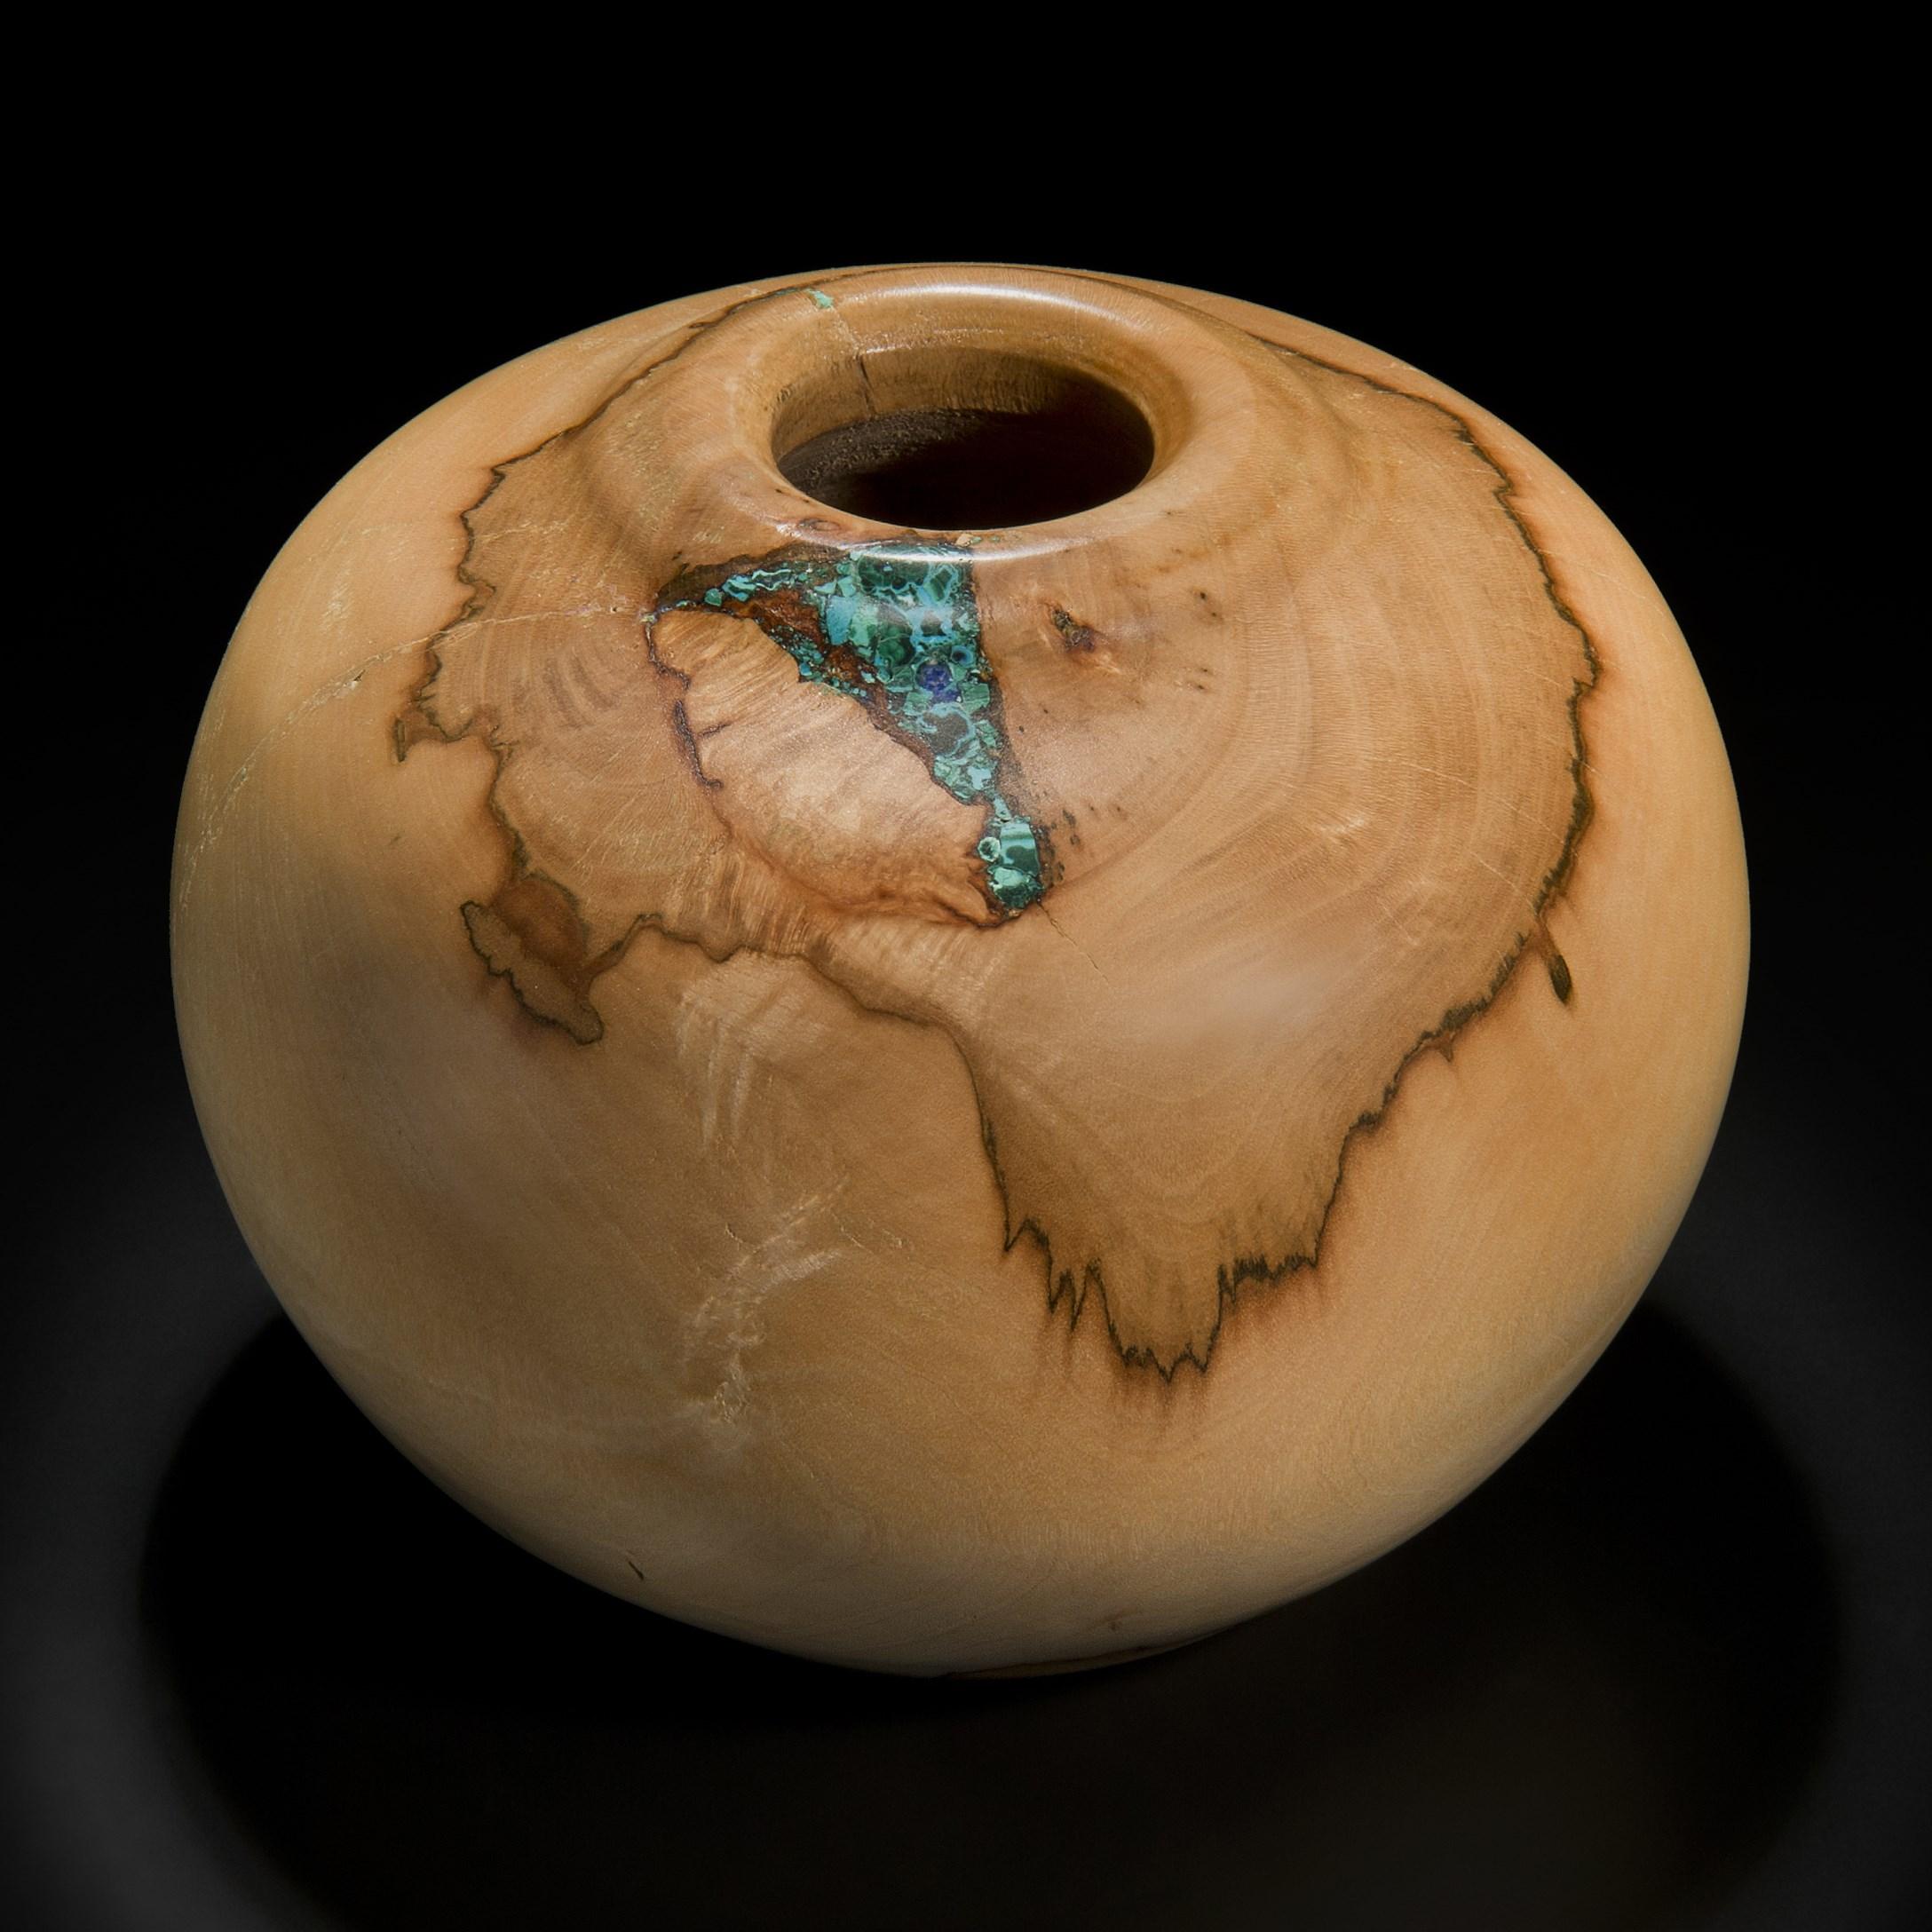 ‘Earthly Treasures No 26’ is a unique sculptural bowl by the British artist, Morrison Thomas. It is made from sycamore inlaid with Chrysocolla & Malachite.

Morrison turns beautiful wooden spheres from damaged or diseased trees that have been